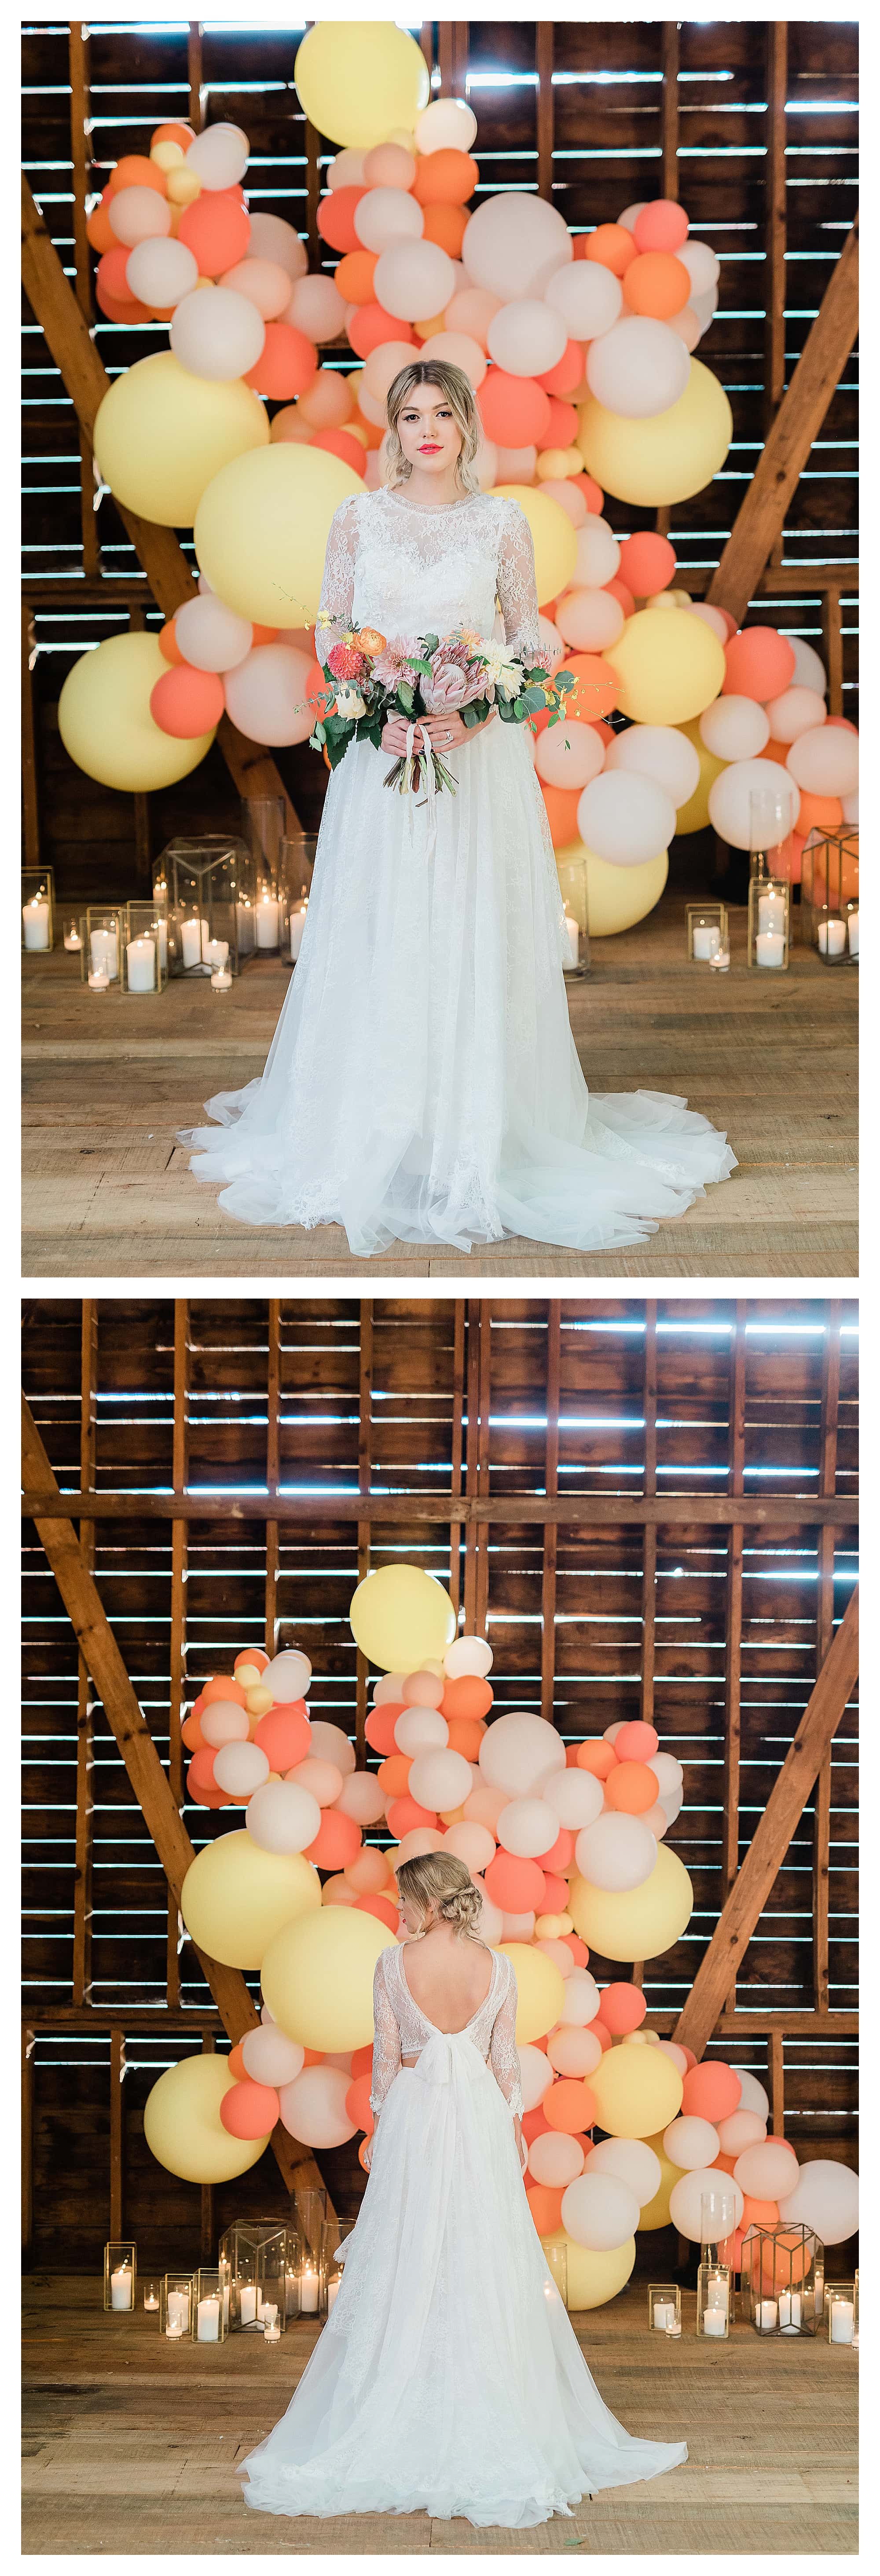 Bride wearing two piece white lace wedding dress holding peach, pink and yellow themed wedding bouquet